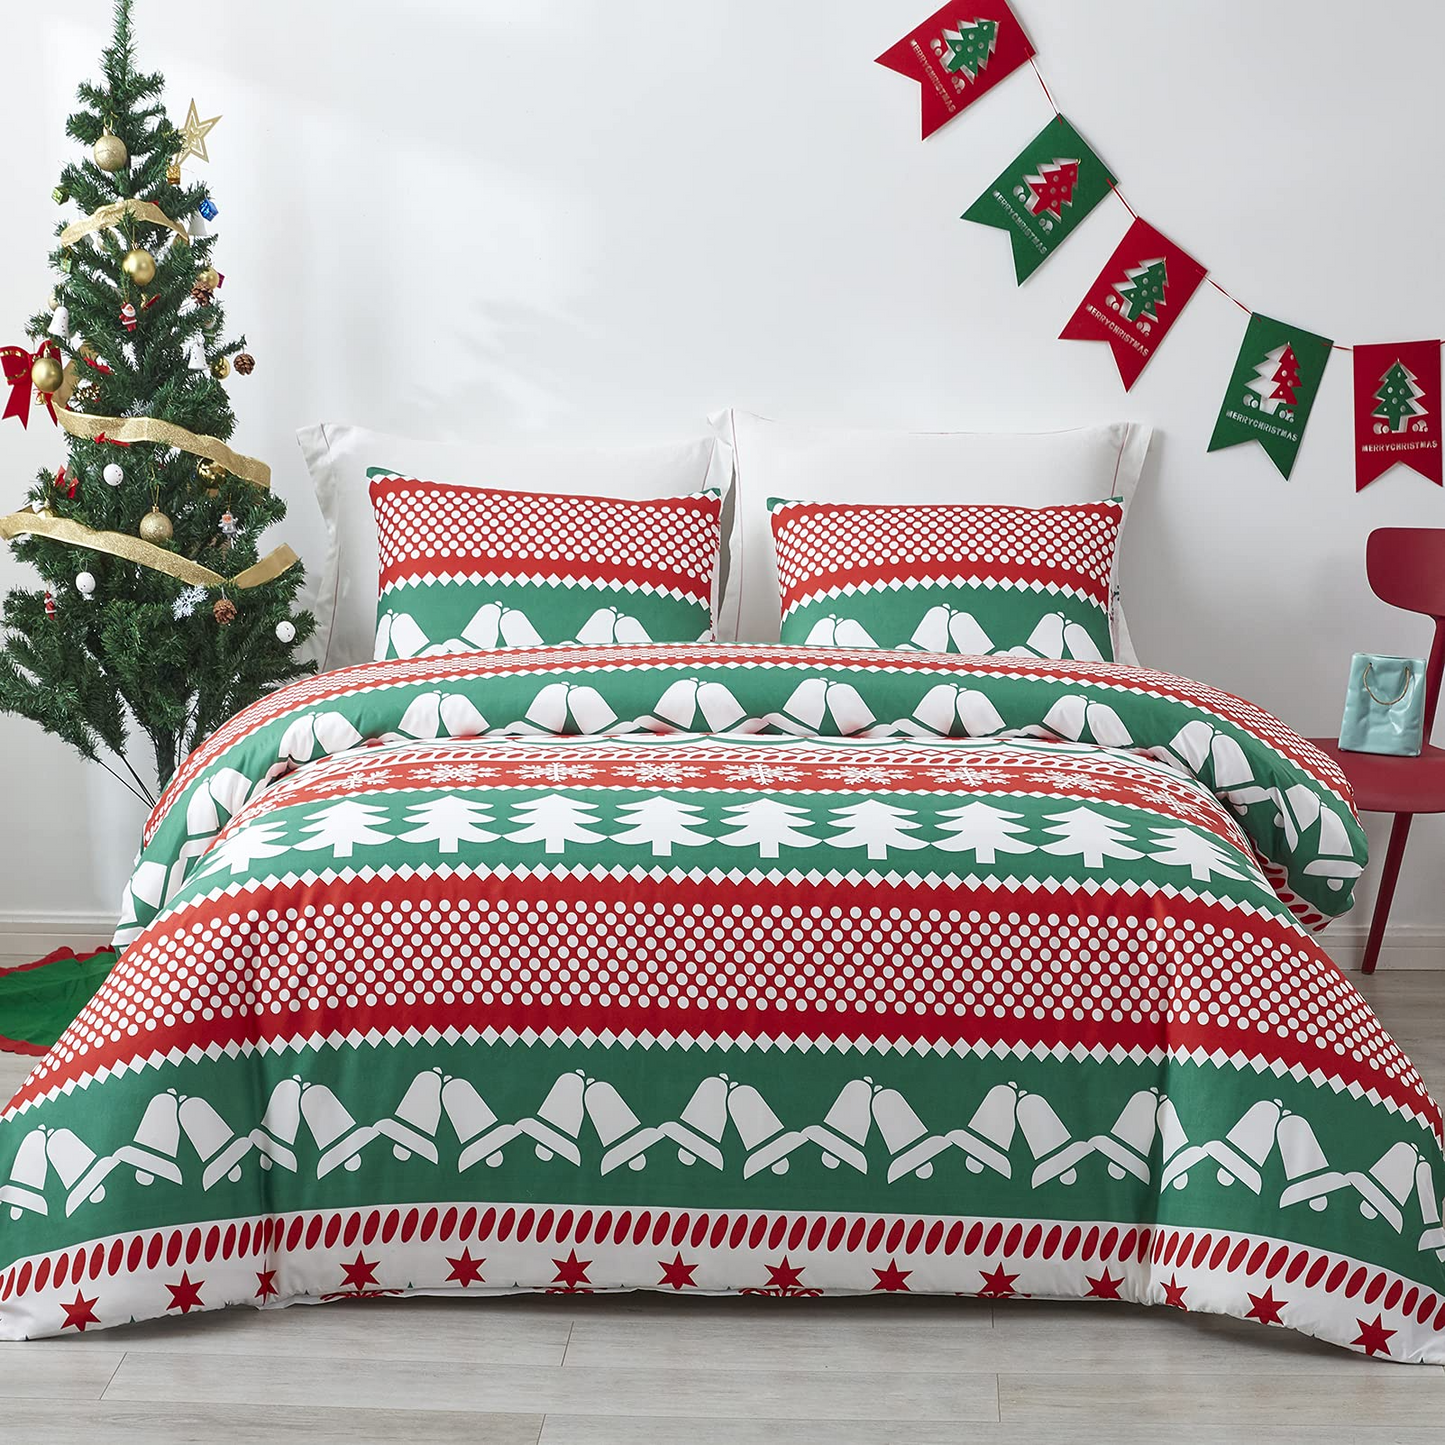 WONGS BEDDING Green With Christmas Elements Duvet Cover Set With 2 Pillowcases